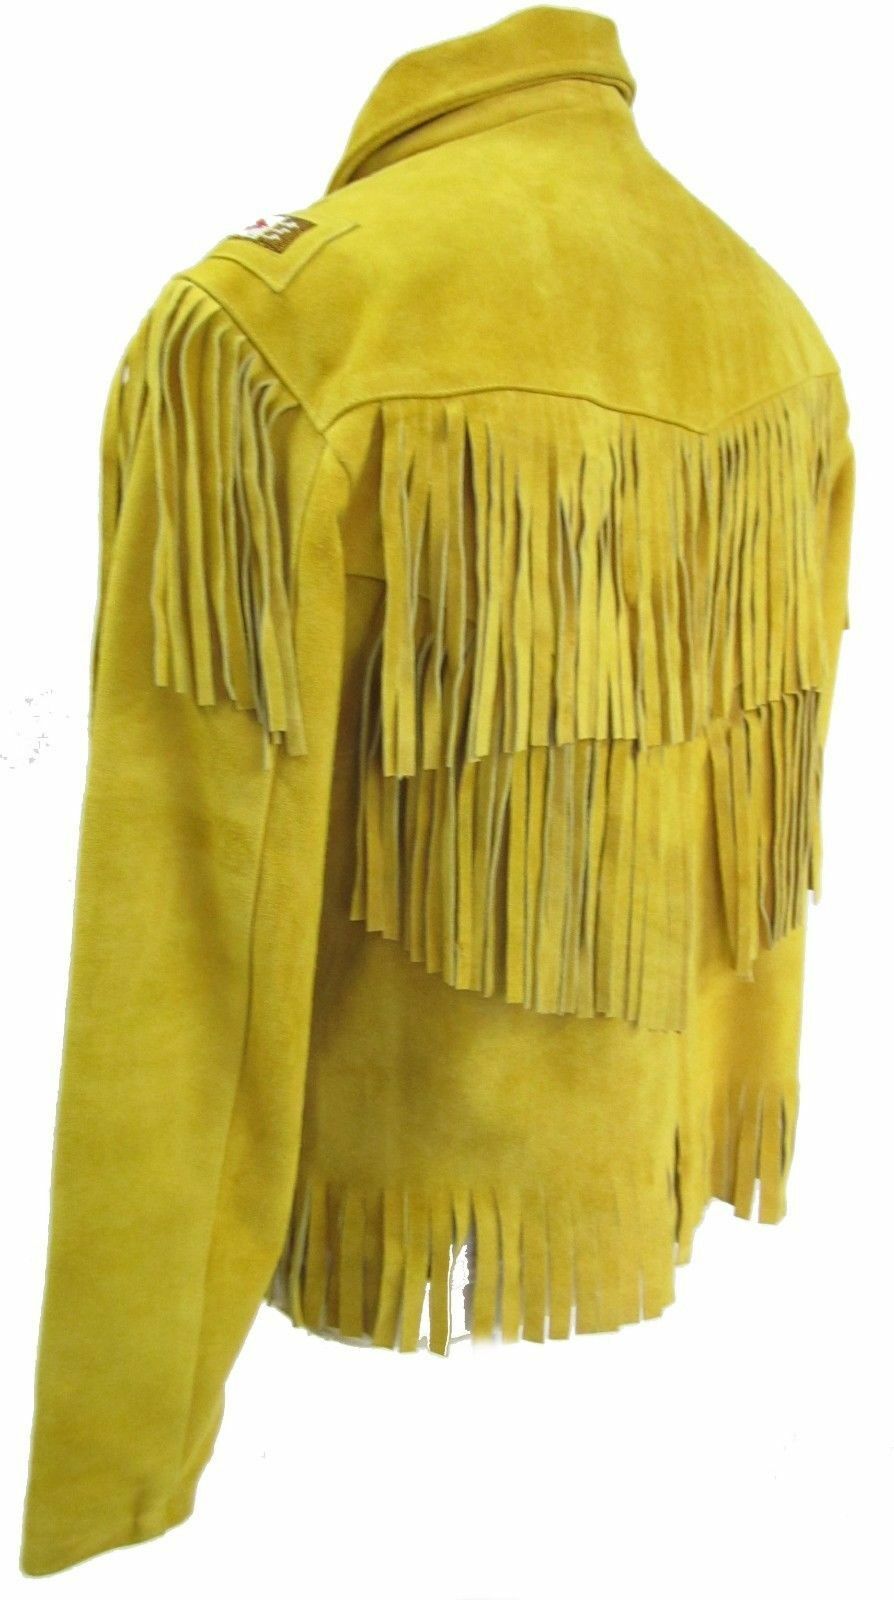 Unisex Yellow Suede Leather Jacket Vintage Cow-boy Fringes and Beads ...